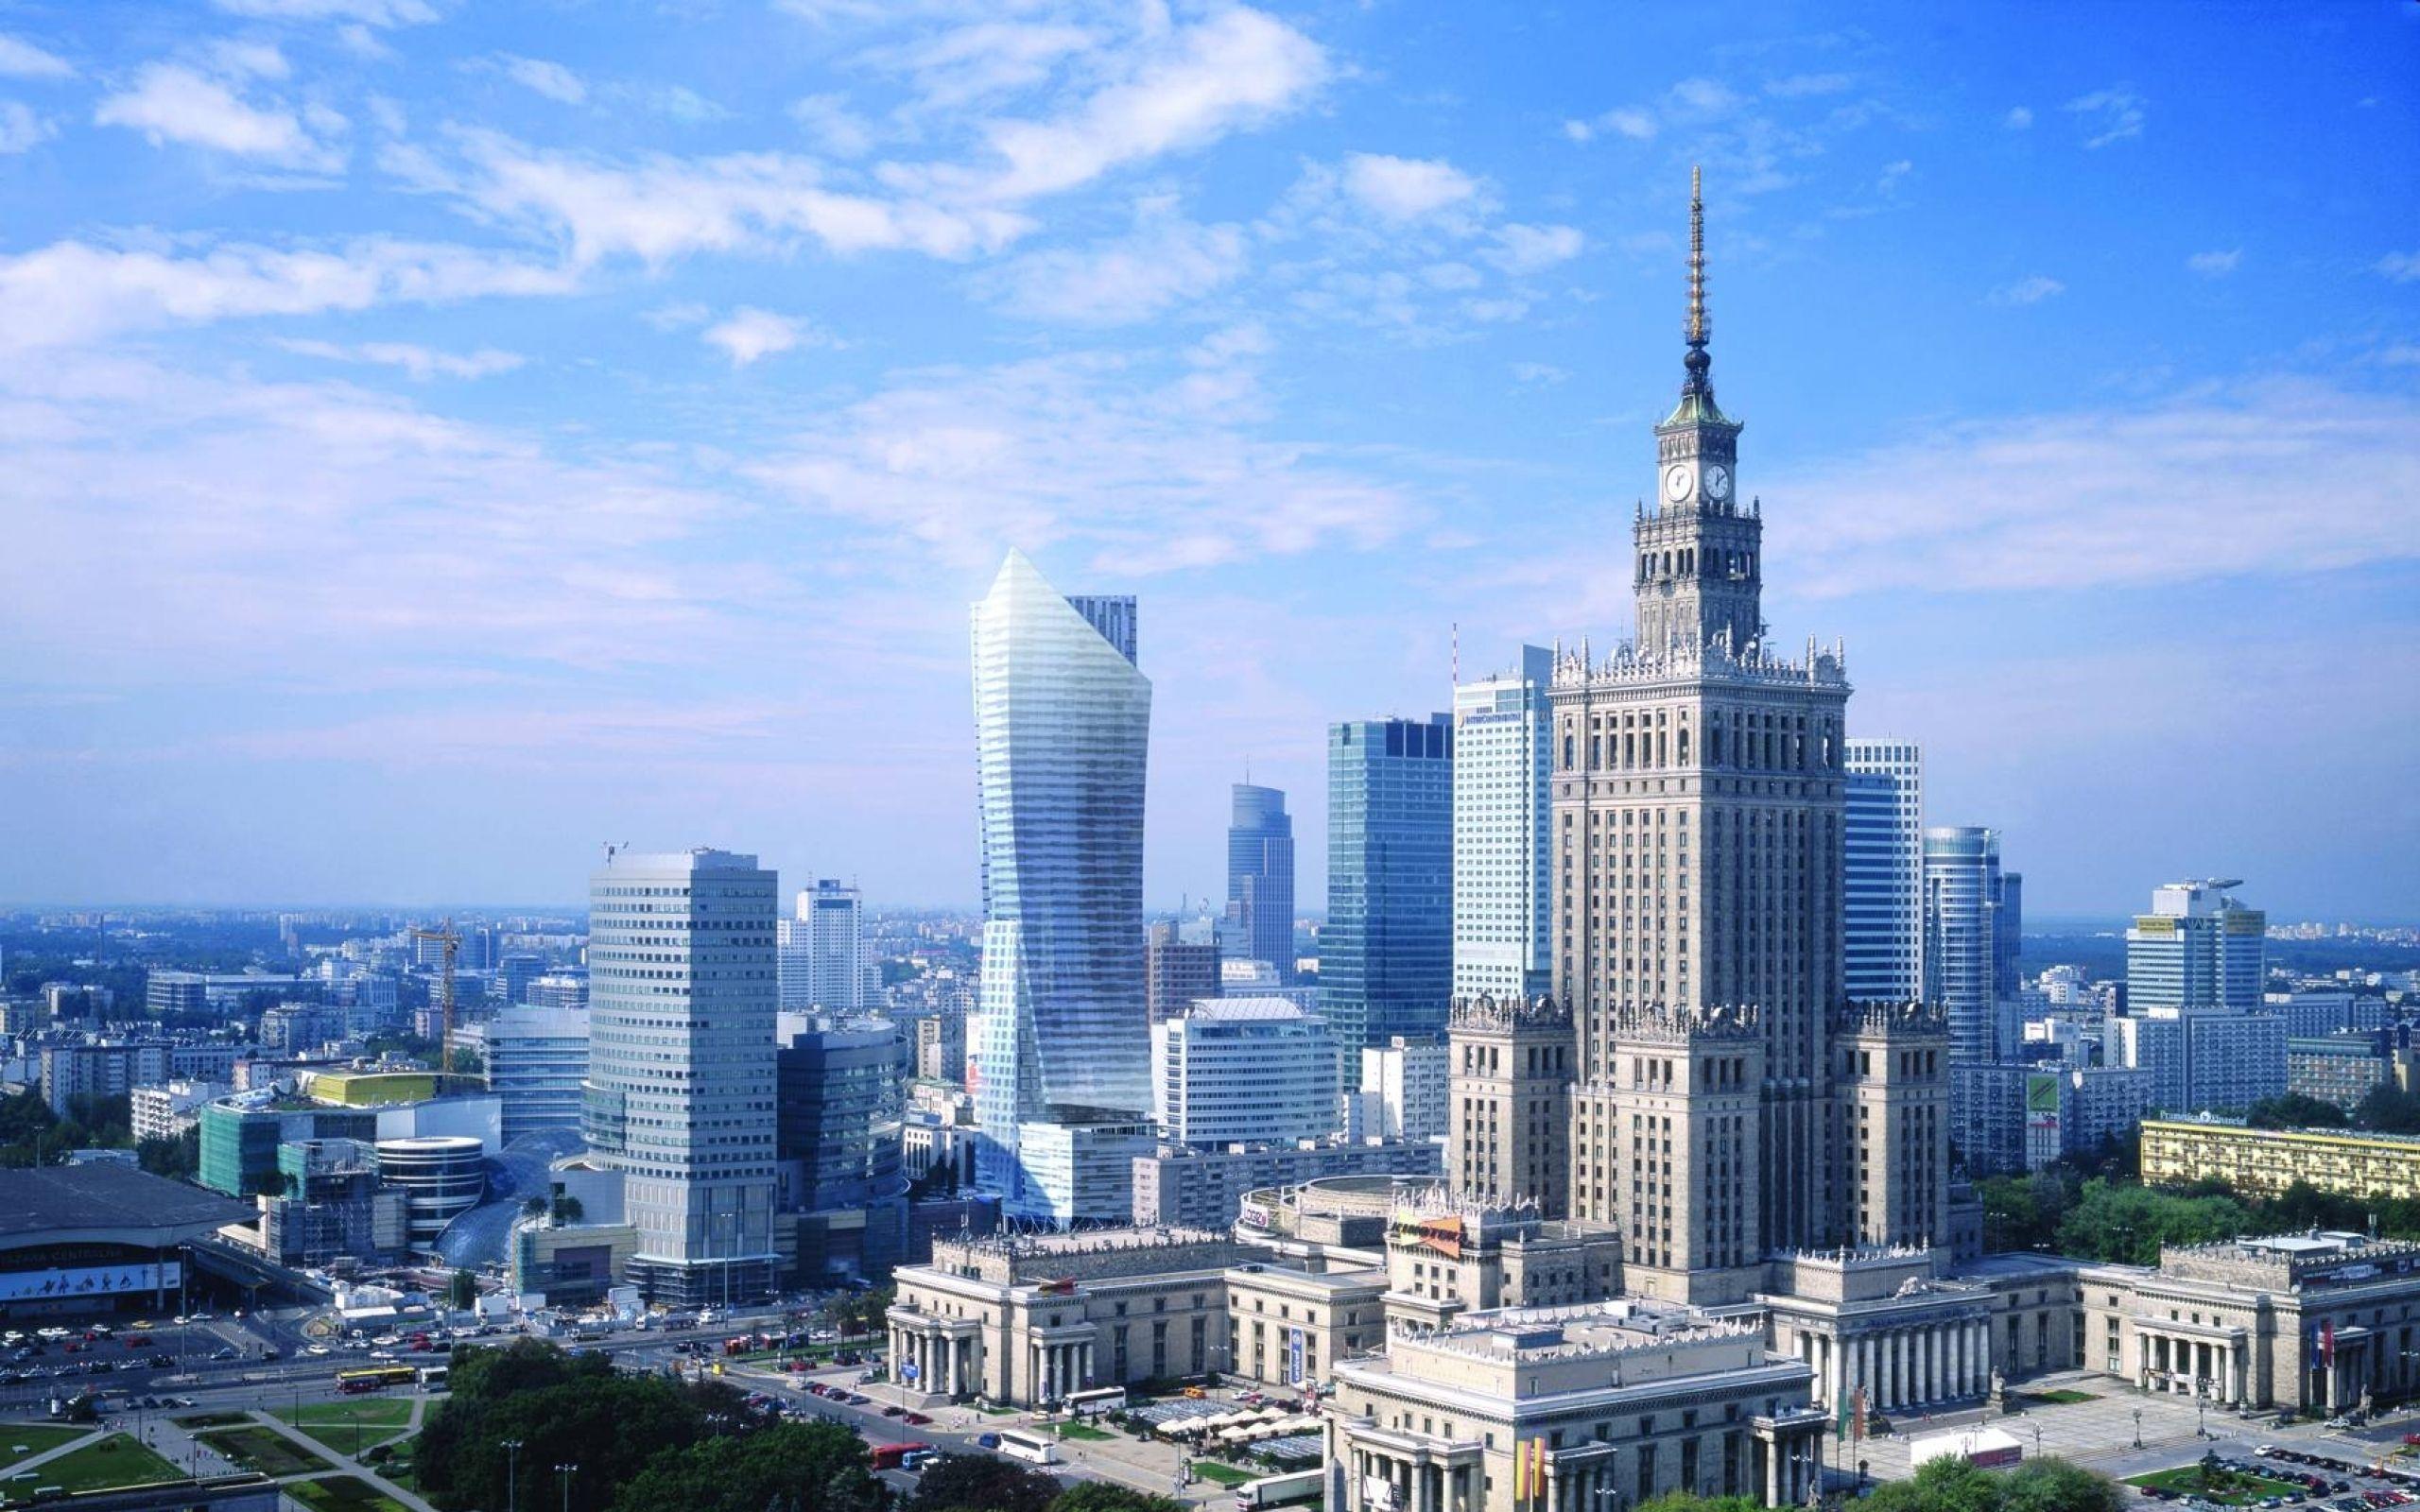 Download Wallpaper, Download 2560x1600 cityscapes poland warsaw